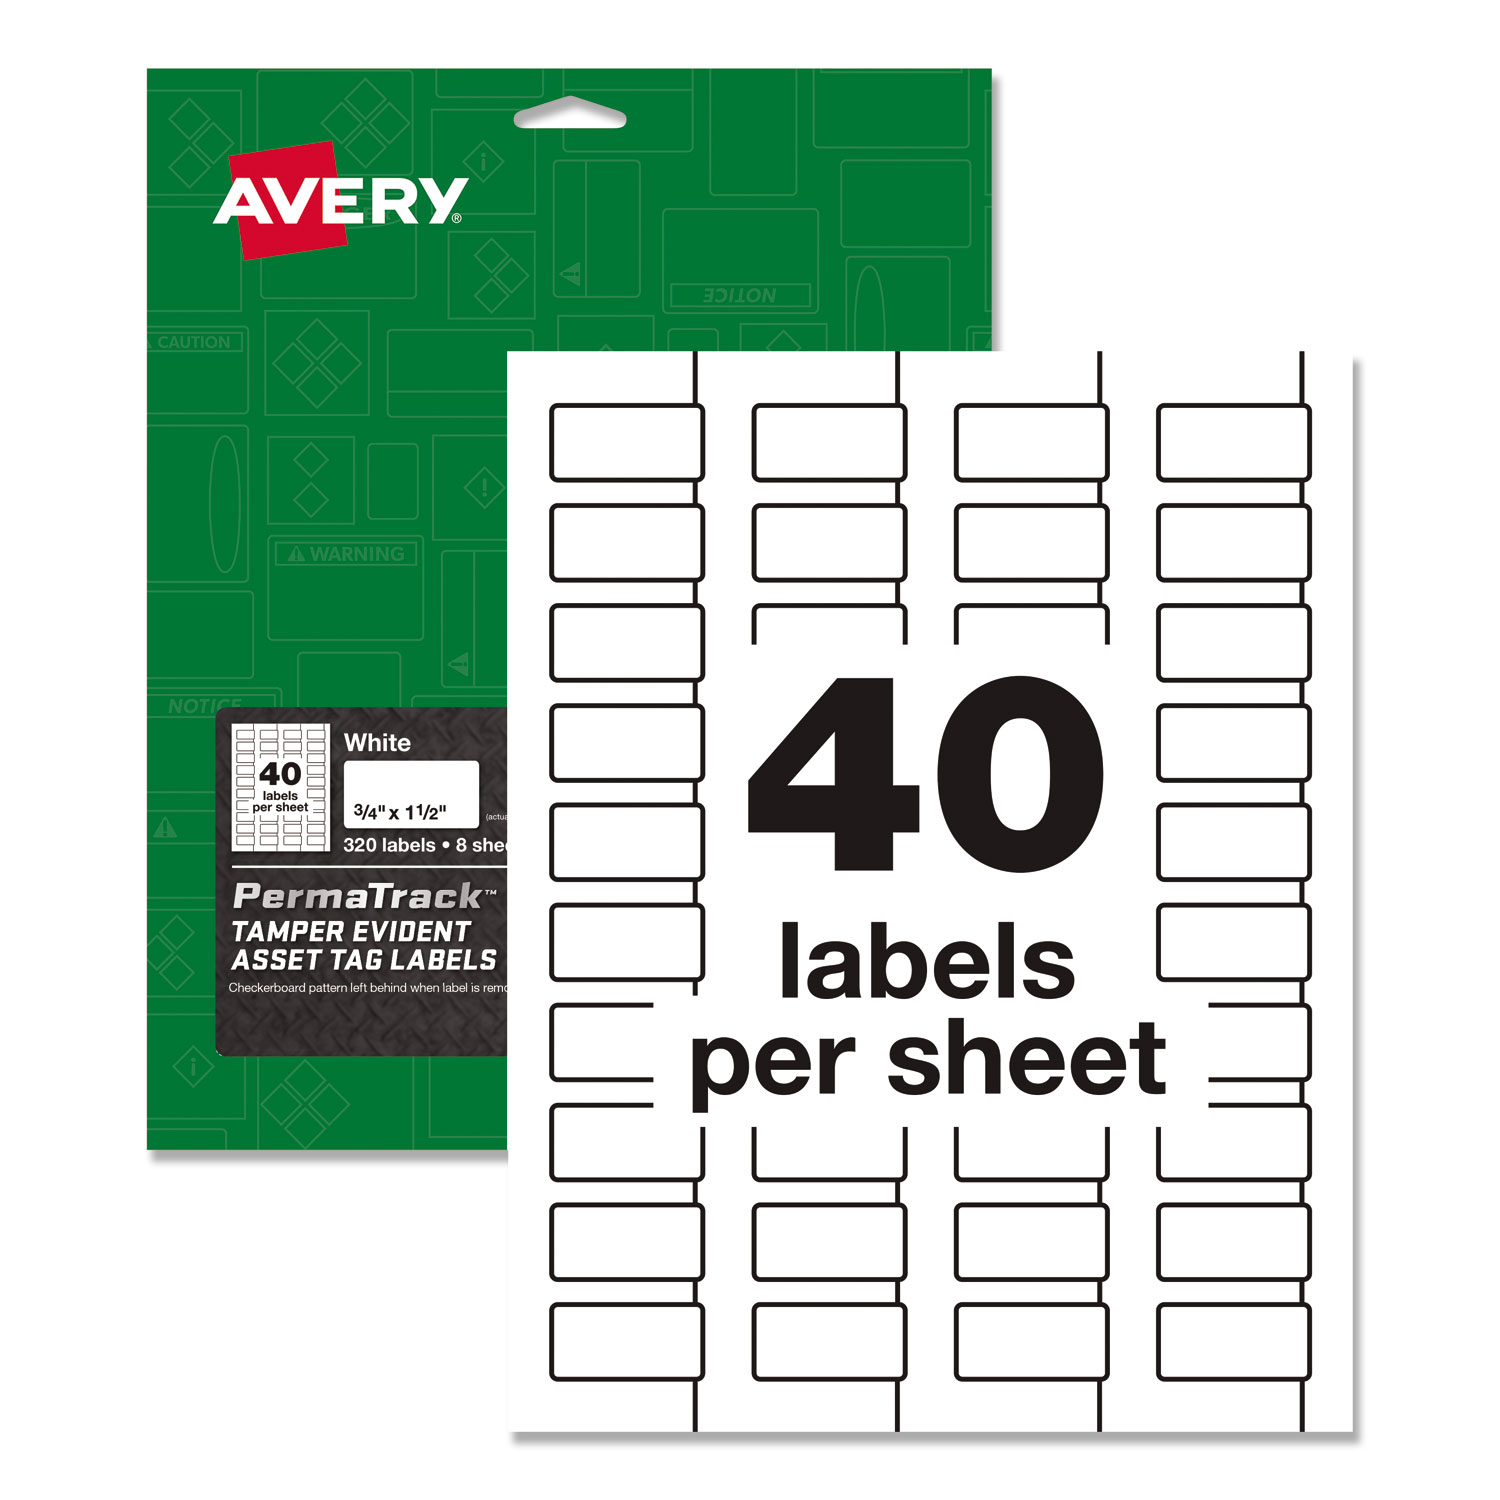  Avery 60528 PermaTrack Tamper-Evident Asset Tag Labels, Laser Printers, 0.75 x 1.5, White, 40/Sheet, 8 Sheets/Pack (AVE60528) 